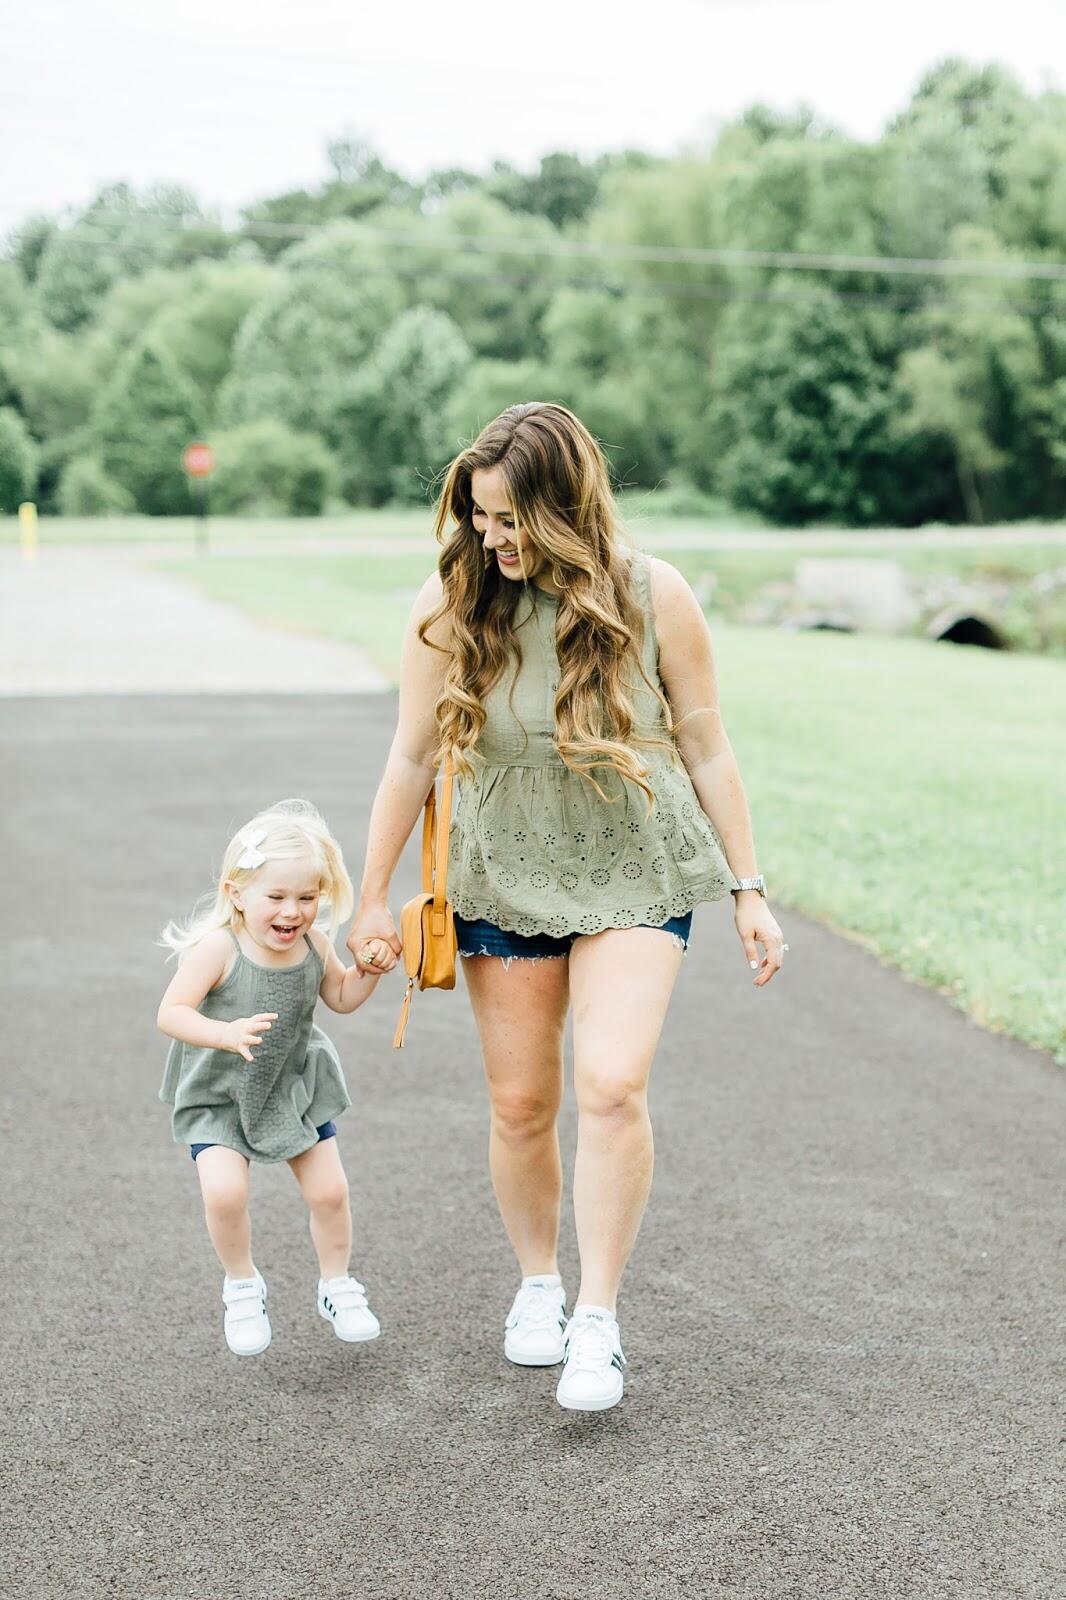 Where to Buy Affordable Casual Summer Clothing for Kids & Moms by fashion blogger Laura of Walking in Memphis in High Heels